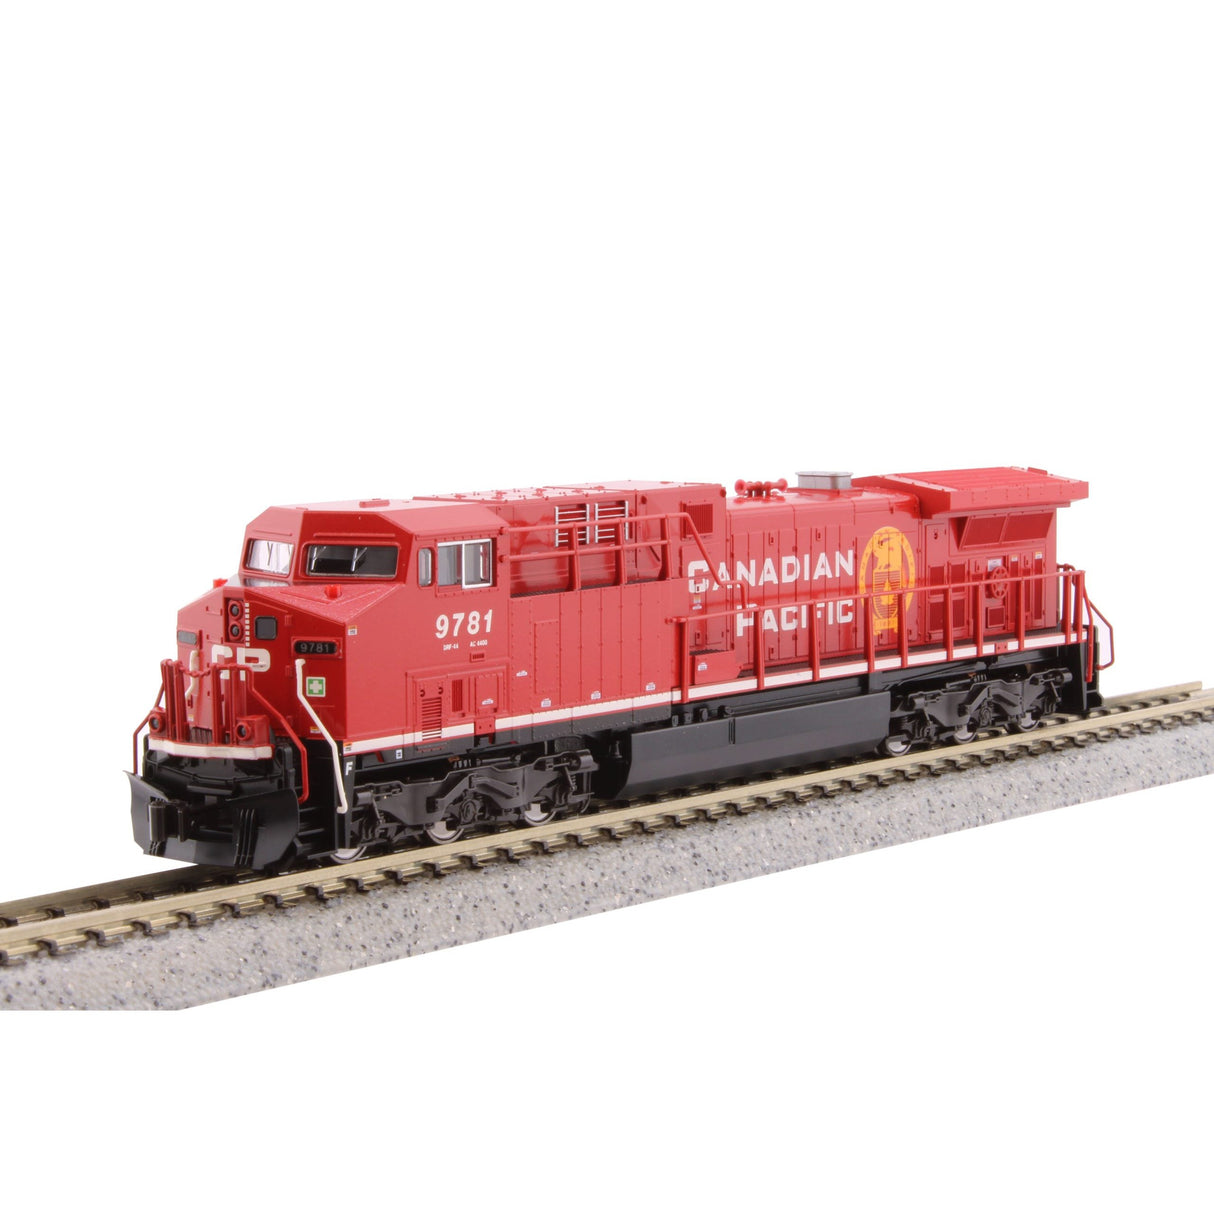 Kato N Scale Canadian Pacific CP 9781 AC4400CW Locomotive